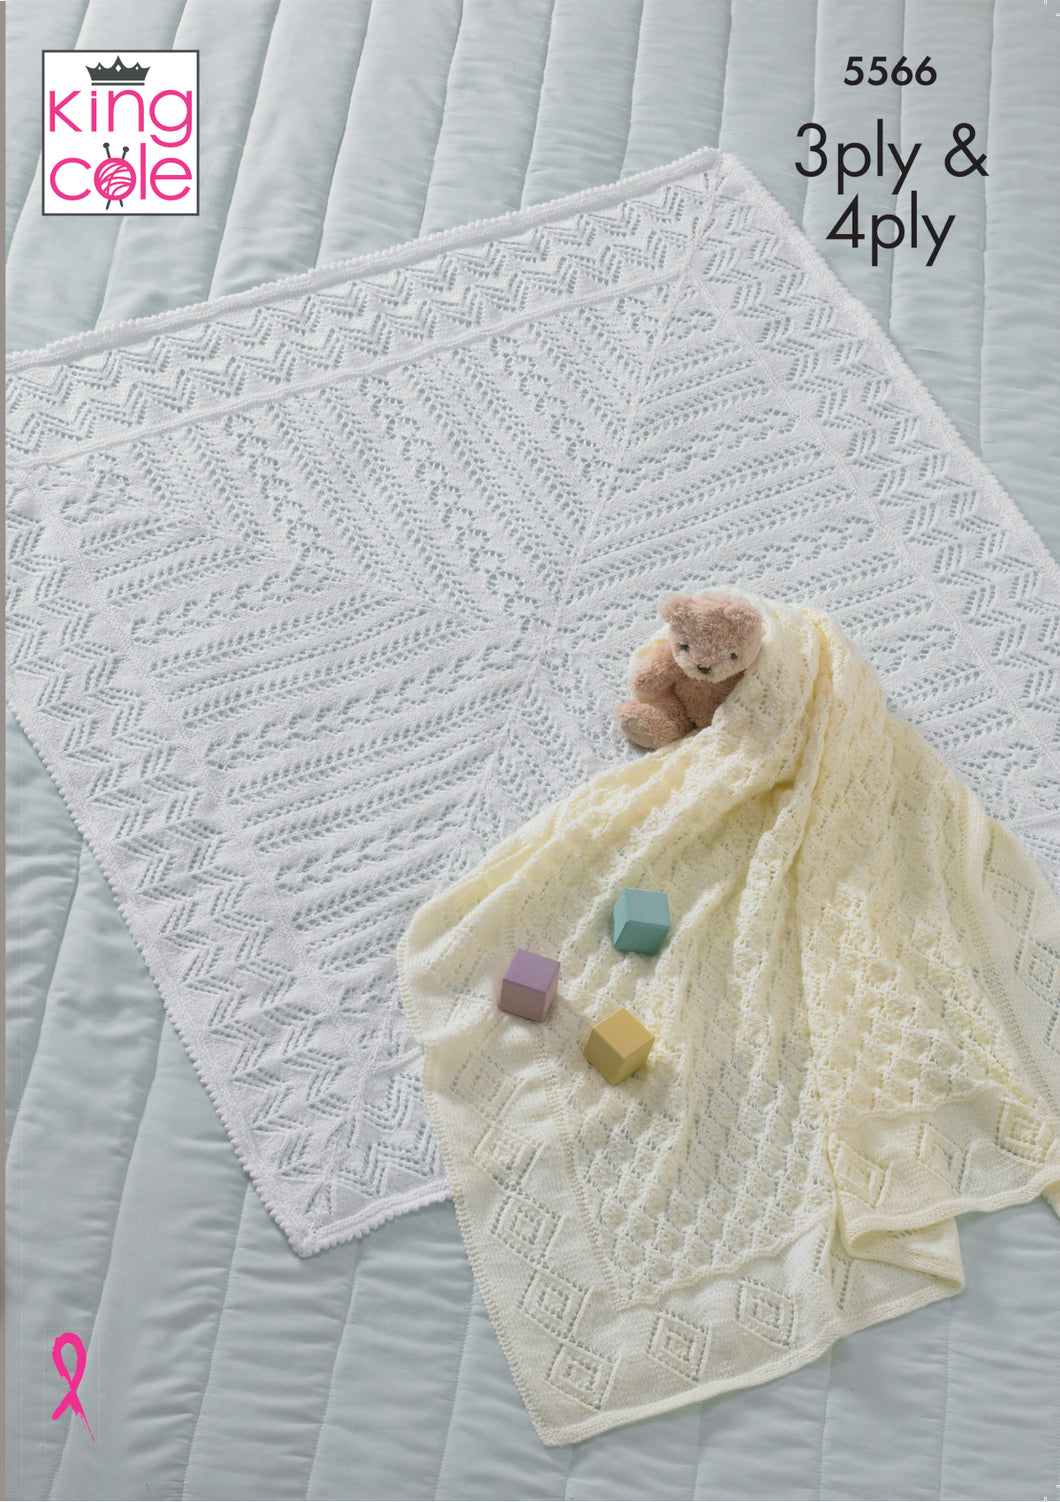 King Cole 3ply & 4ply Knitting Pattern - Baby Blankets (5566)